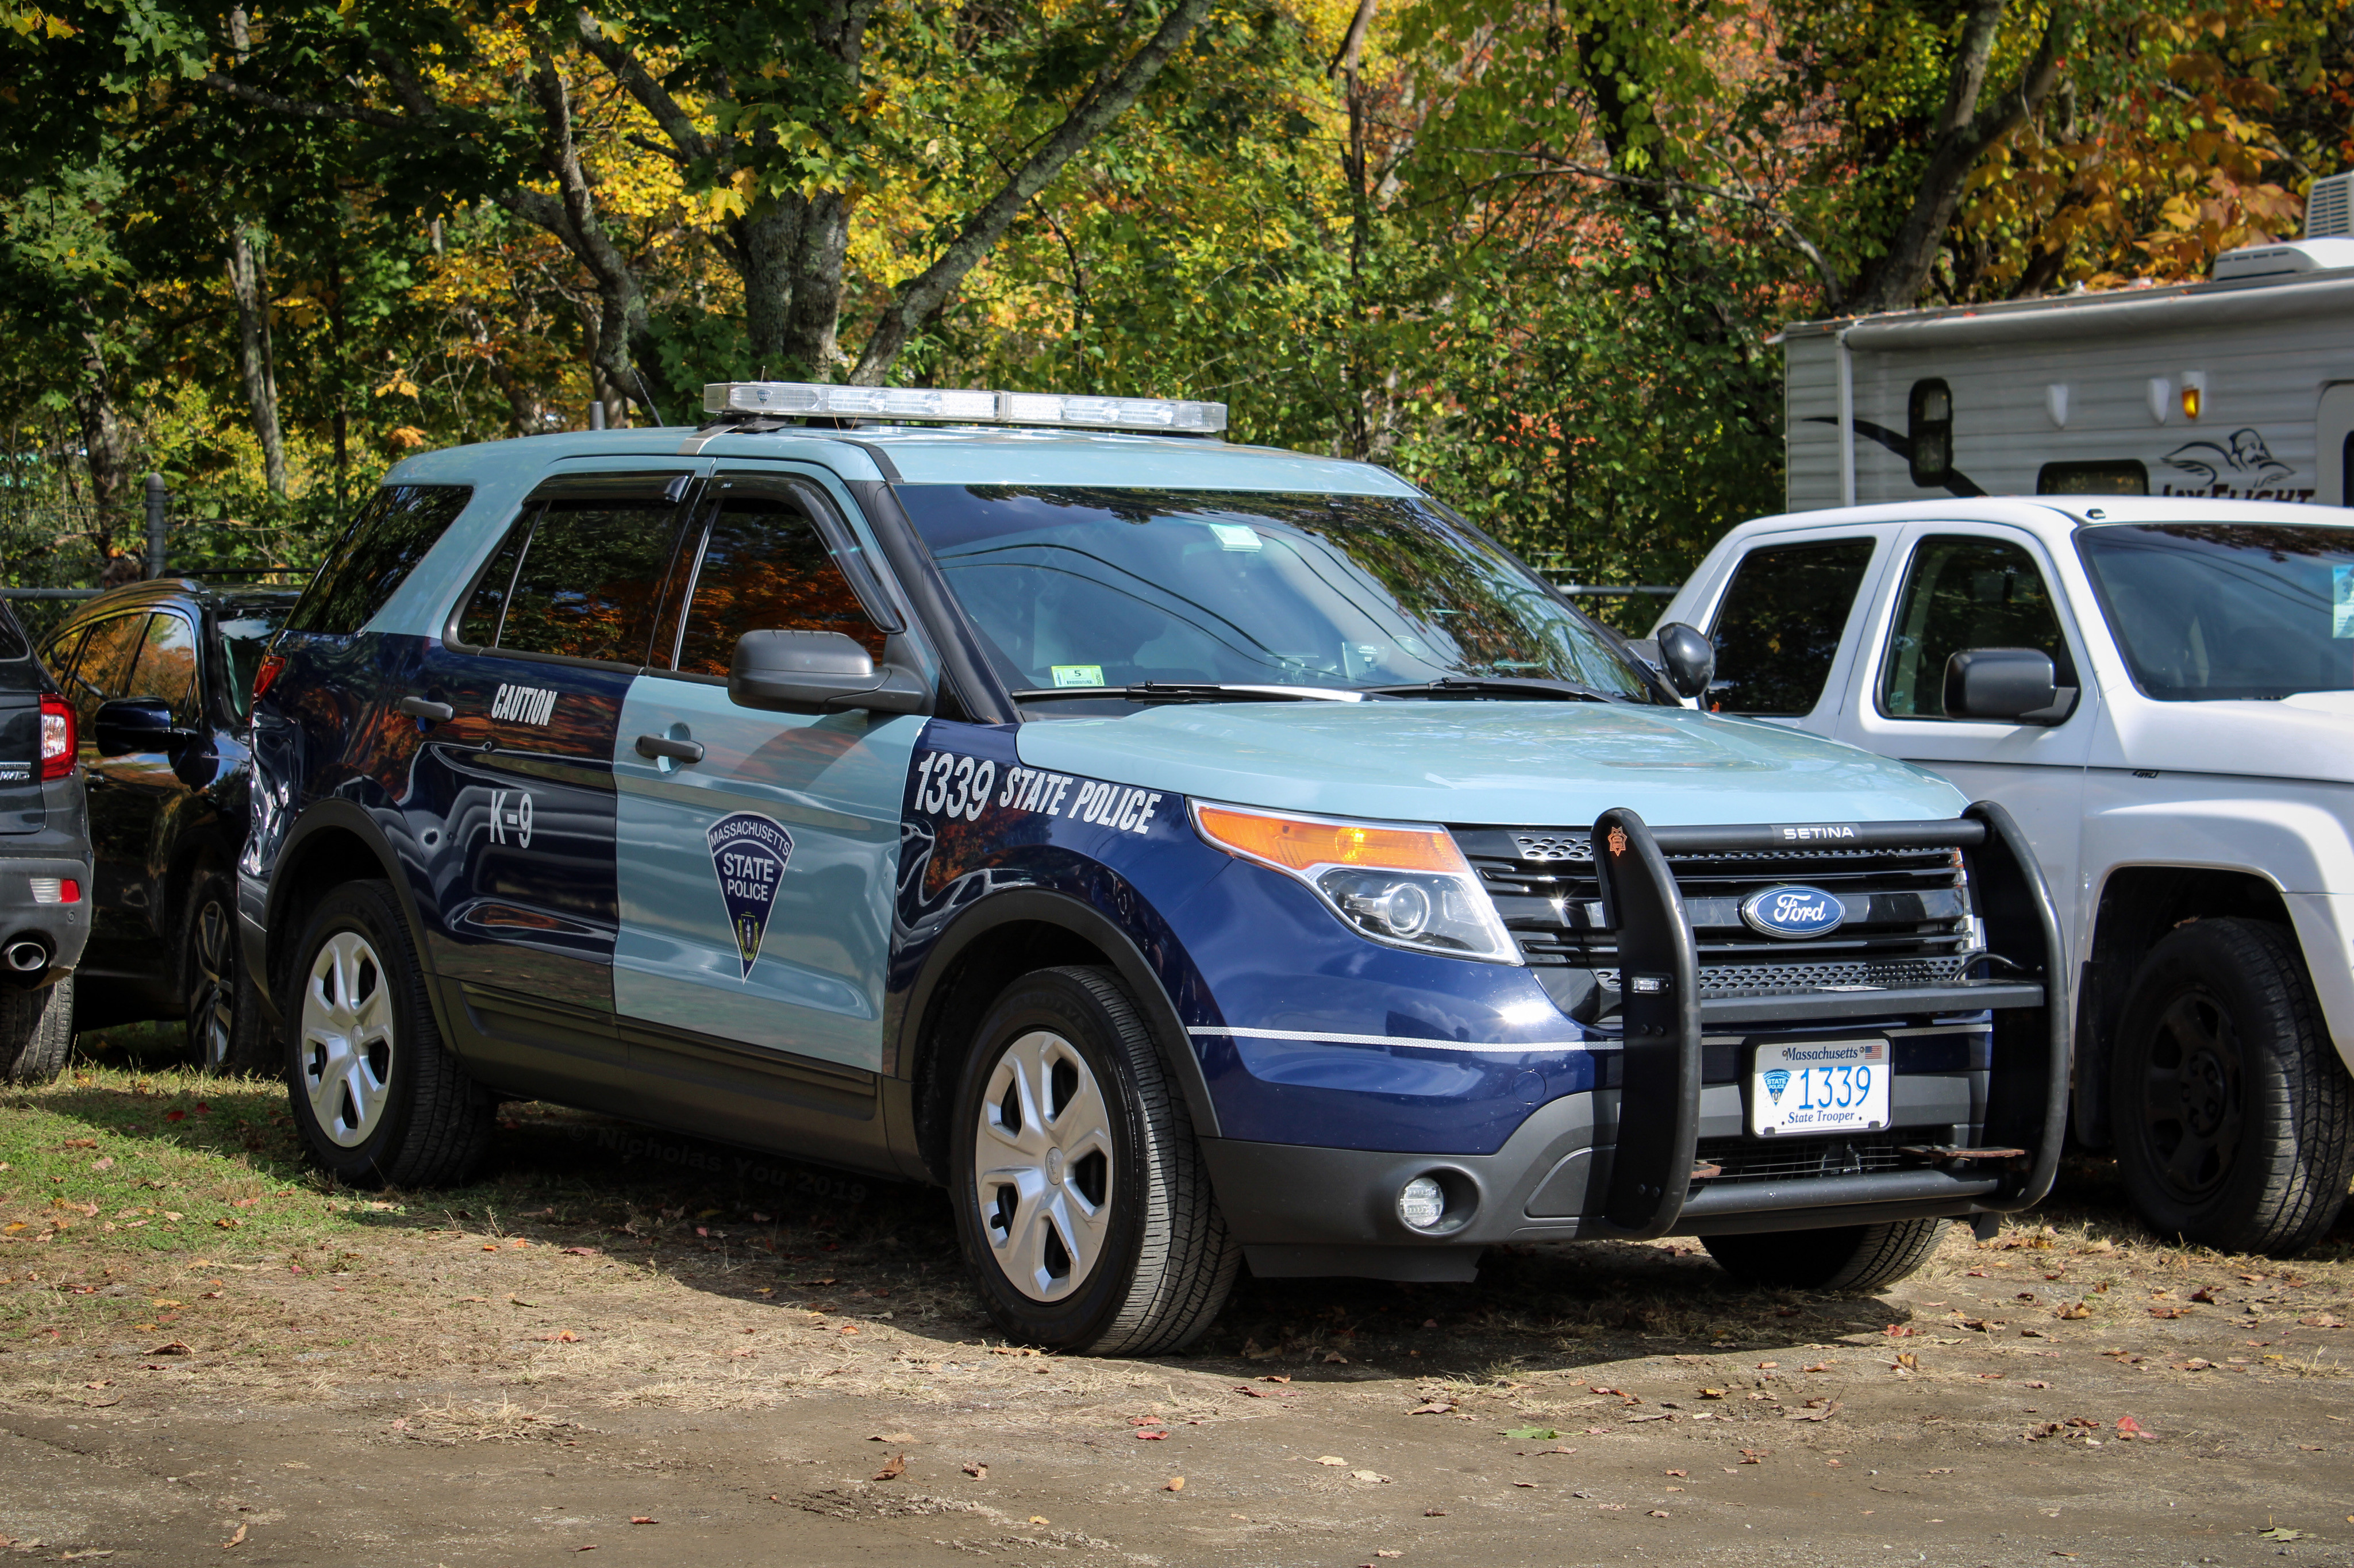 A photo  of Massachusetts State Police
            Cruiser 1339, a 2015 Ford Police Interceptor Utility             taken by Nicholas You